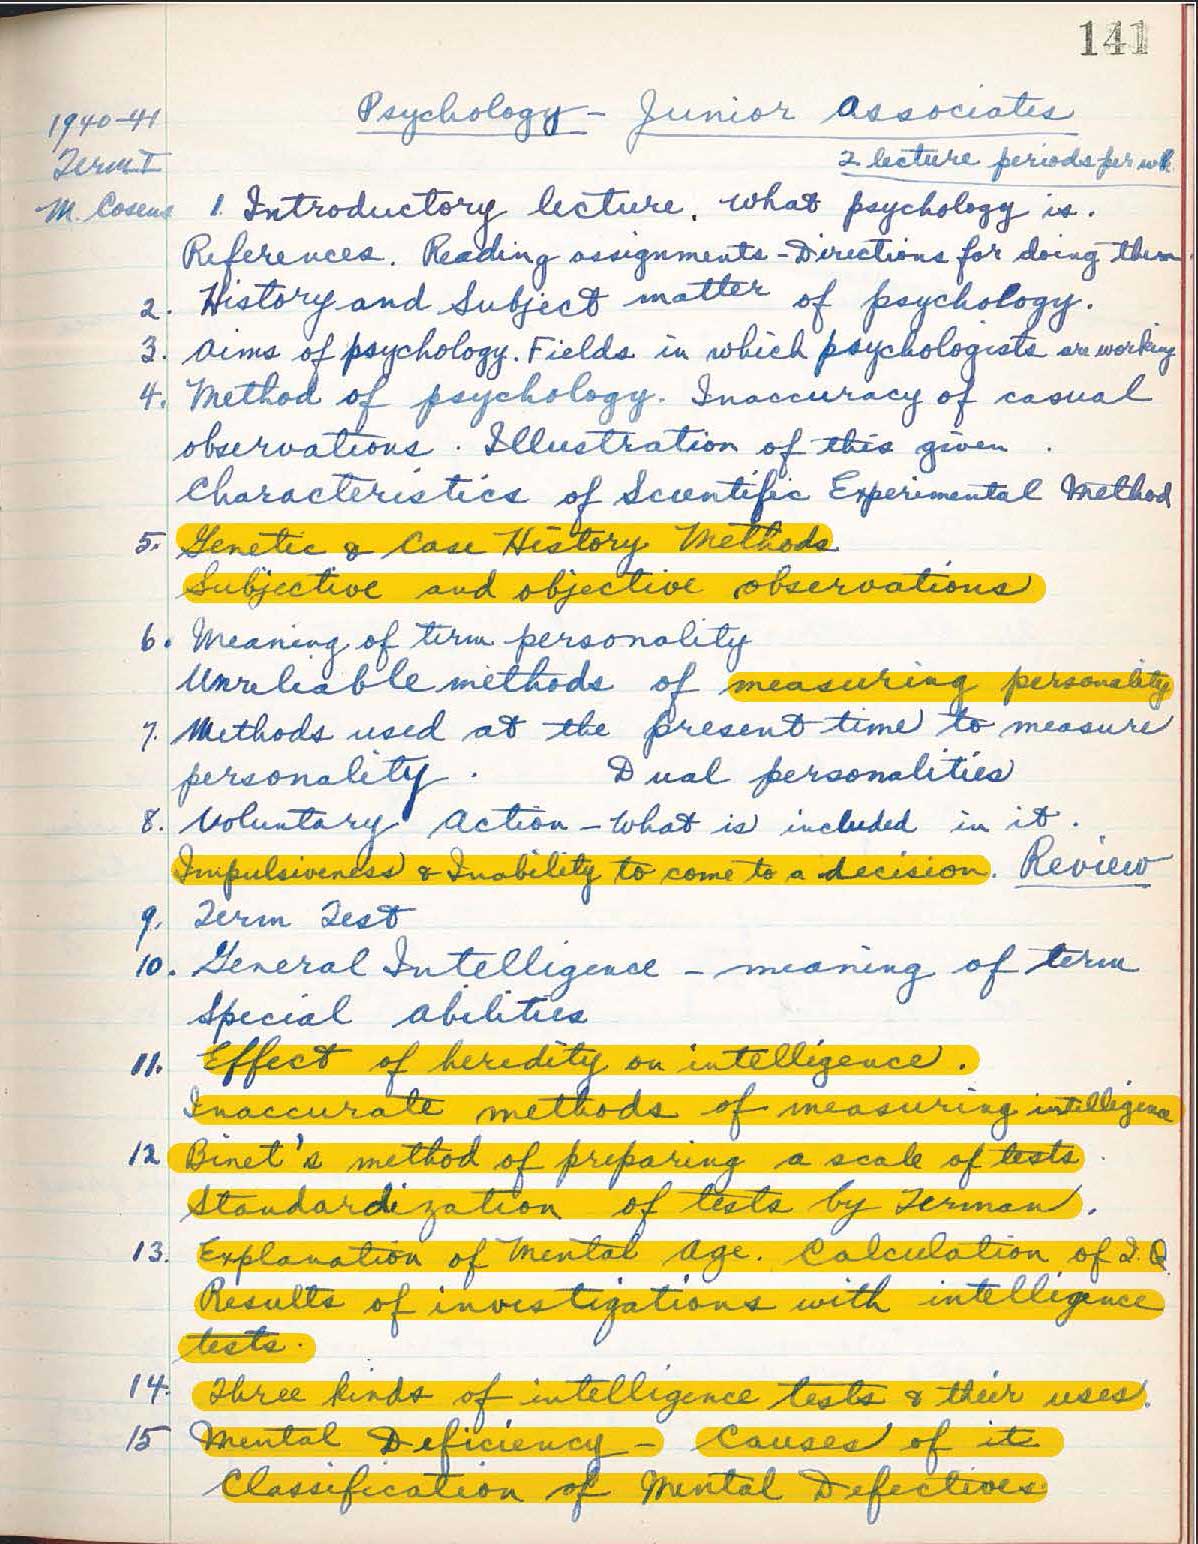 Macdonald Institute Psychology course outline, 1940-1940. The course includes lessons on eugenics intelligence testing and classifications and the “economic, social, moral, and educational problems with mental defectives.” 